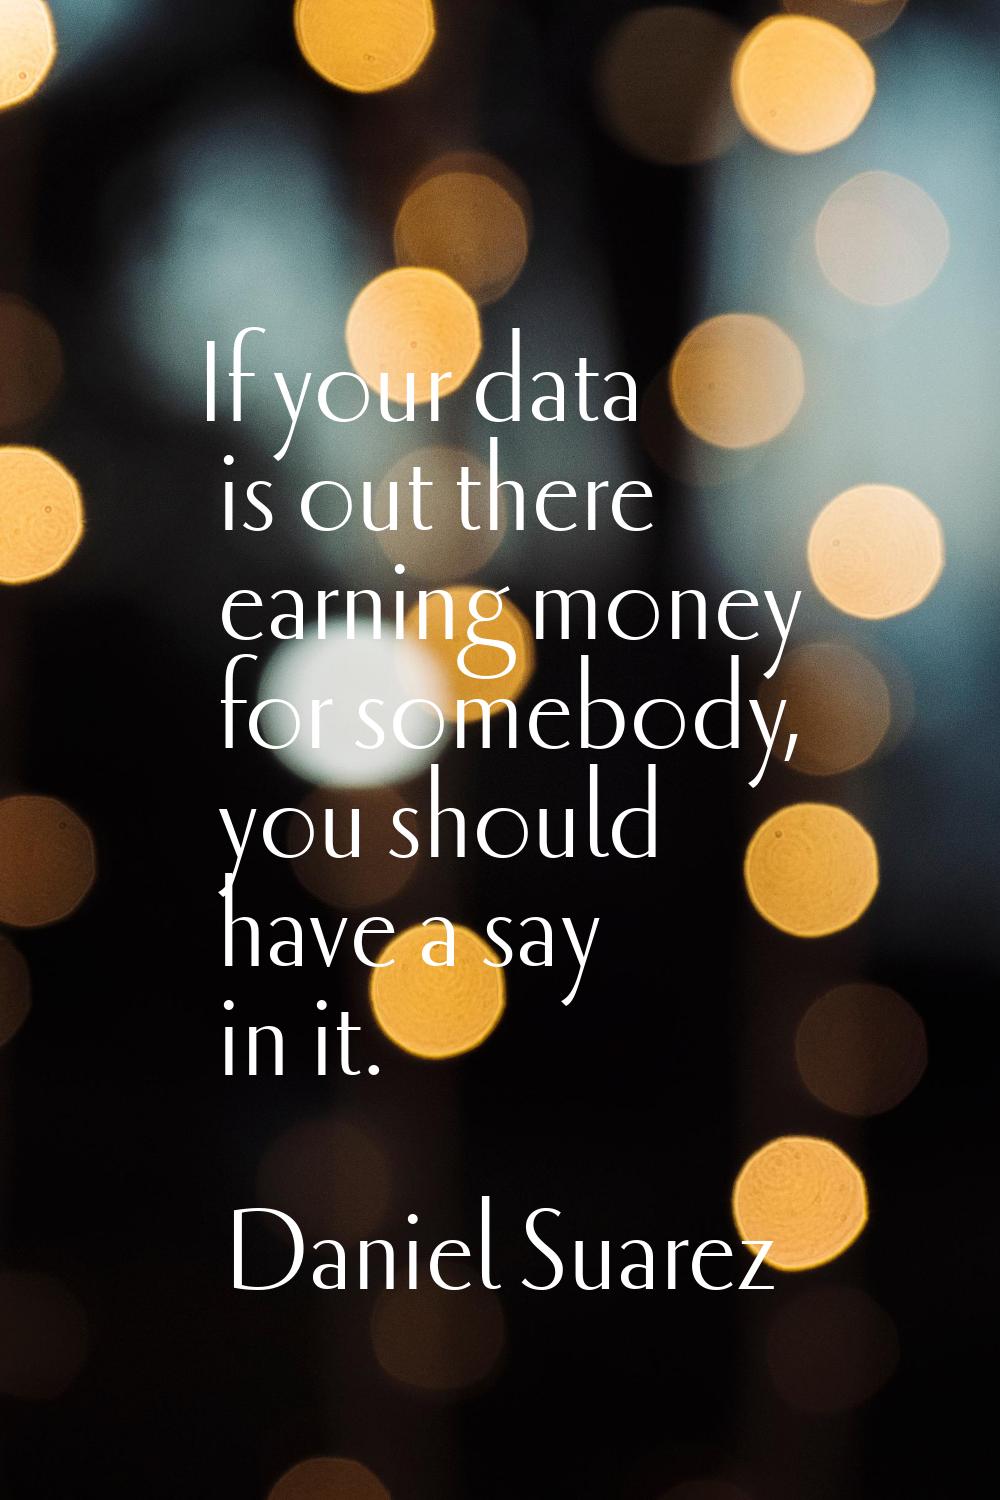 If your data is out there earning money for somebody, you should have a say in it.